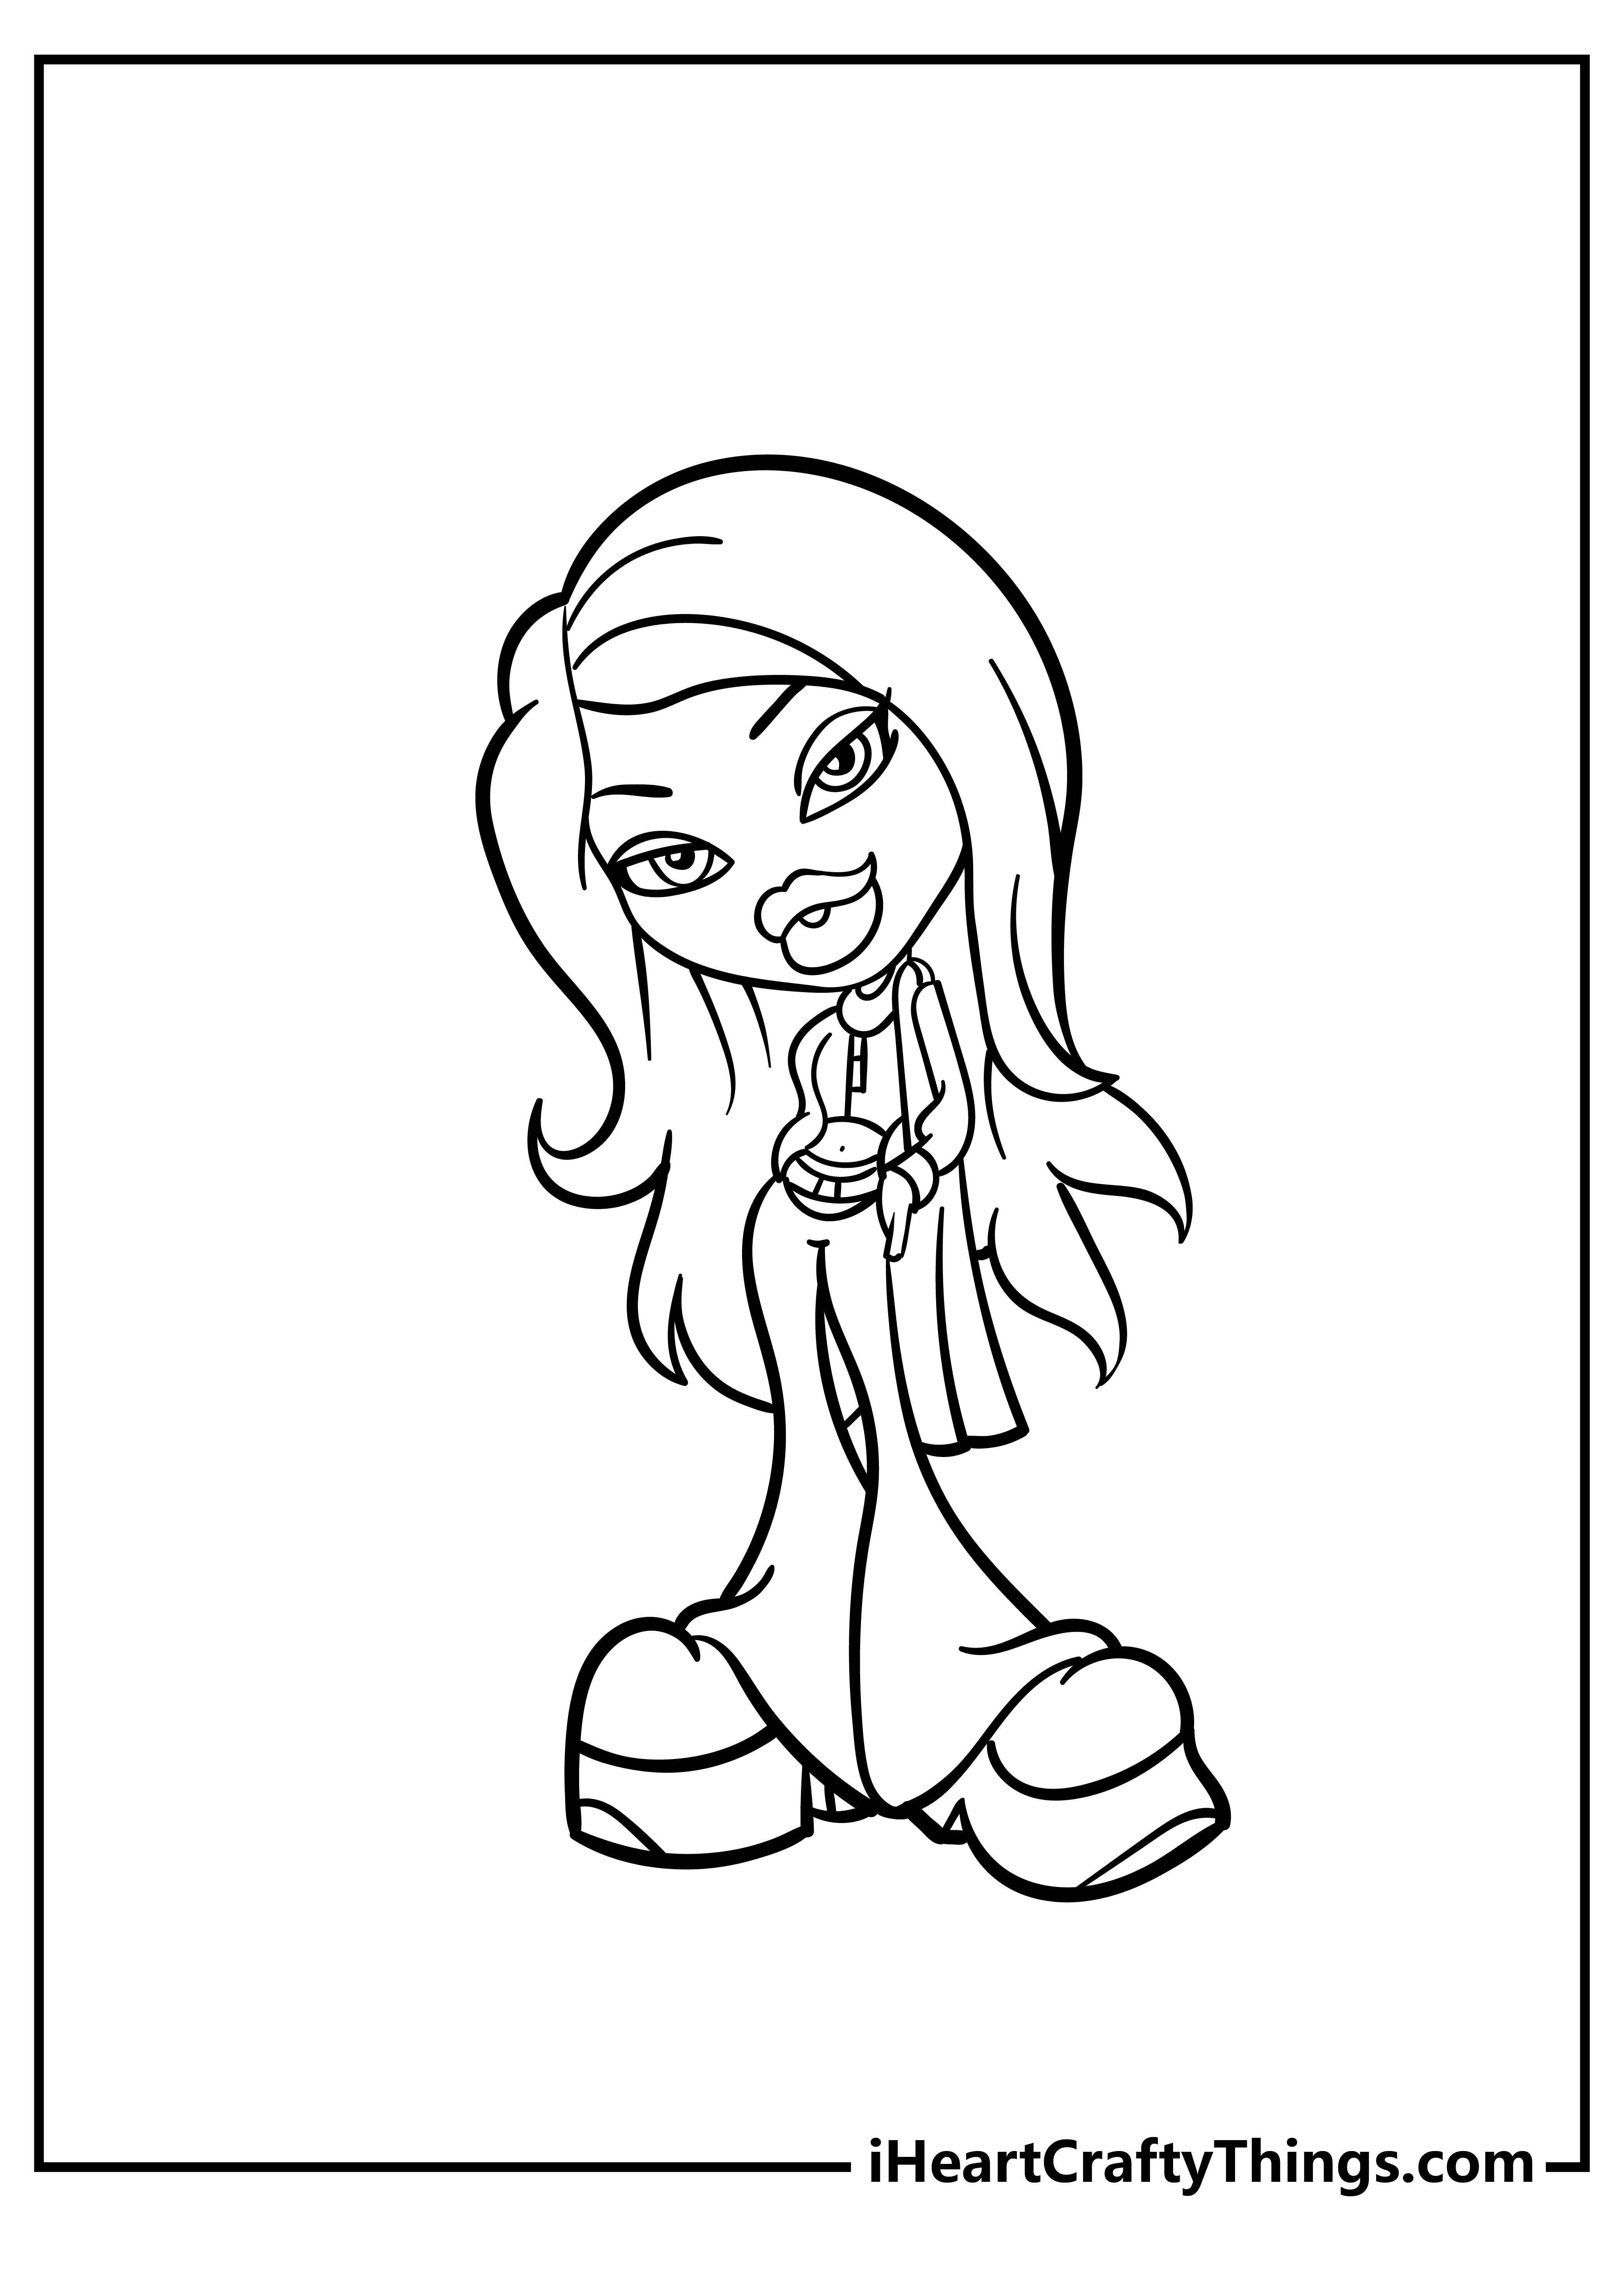 Bratz Coloring Pages for preschoolers free printable